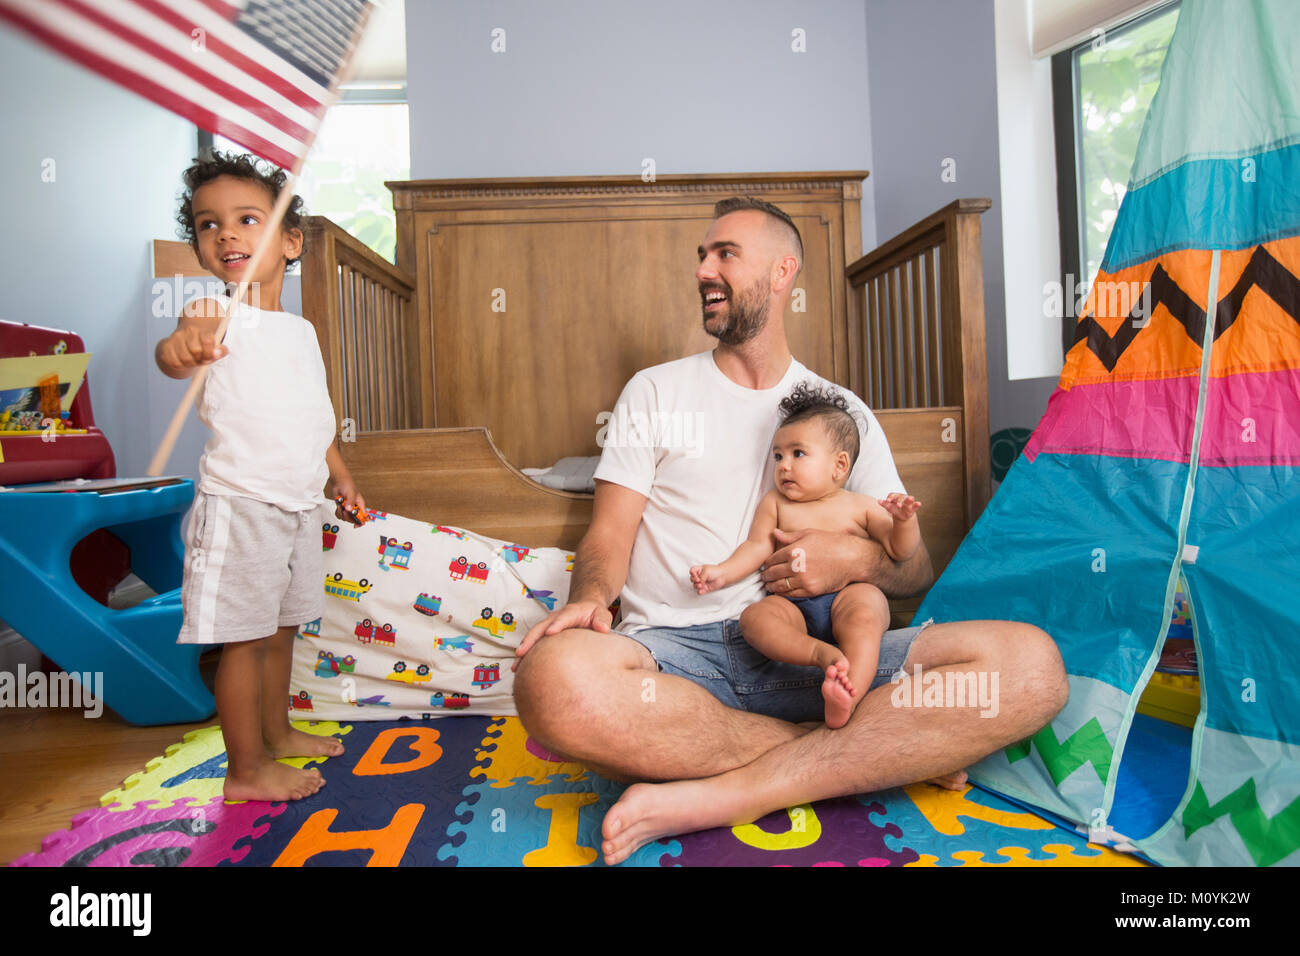 Father watching son waving American flag in playroom Stock Photo